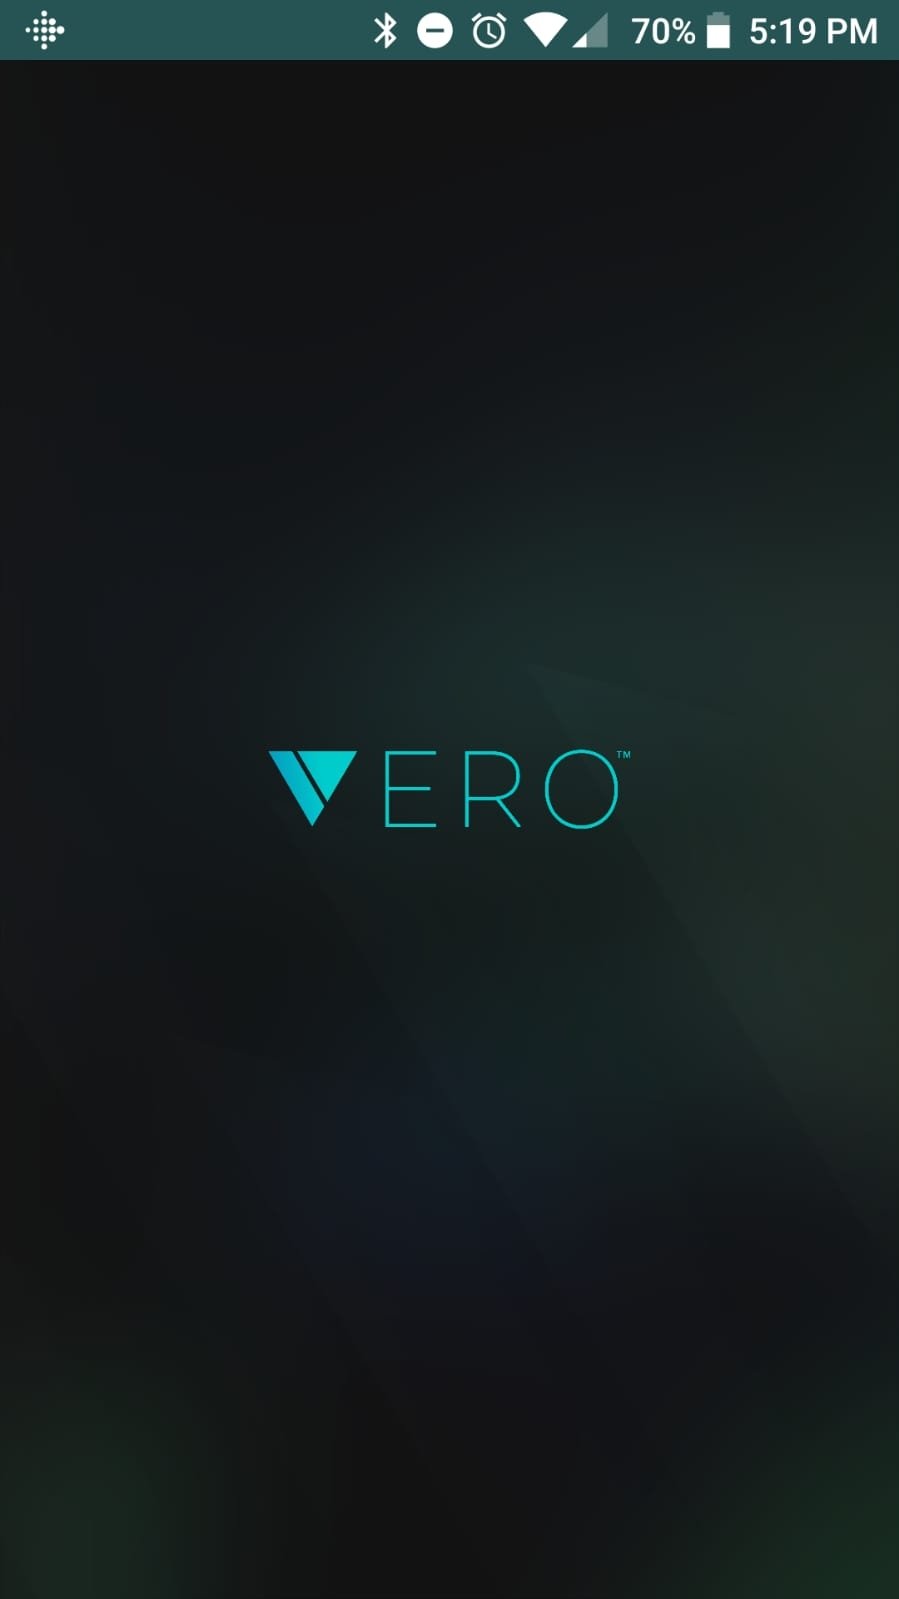 Vero - True Social for Android